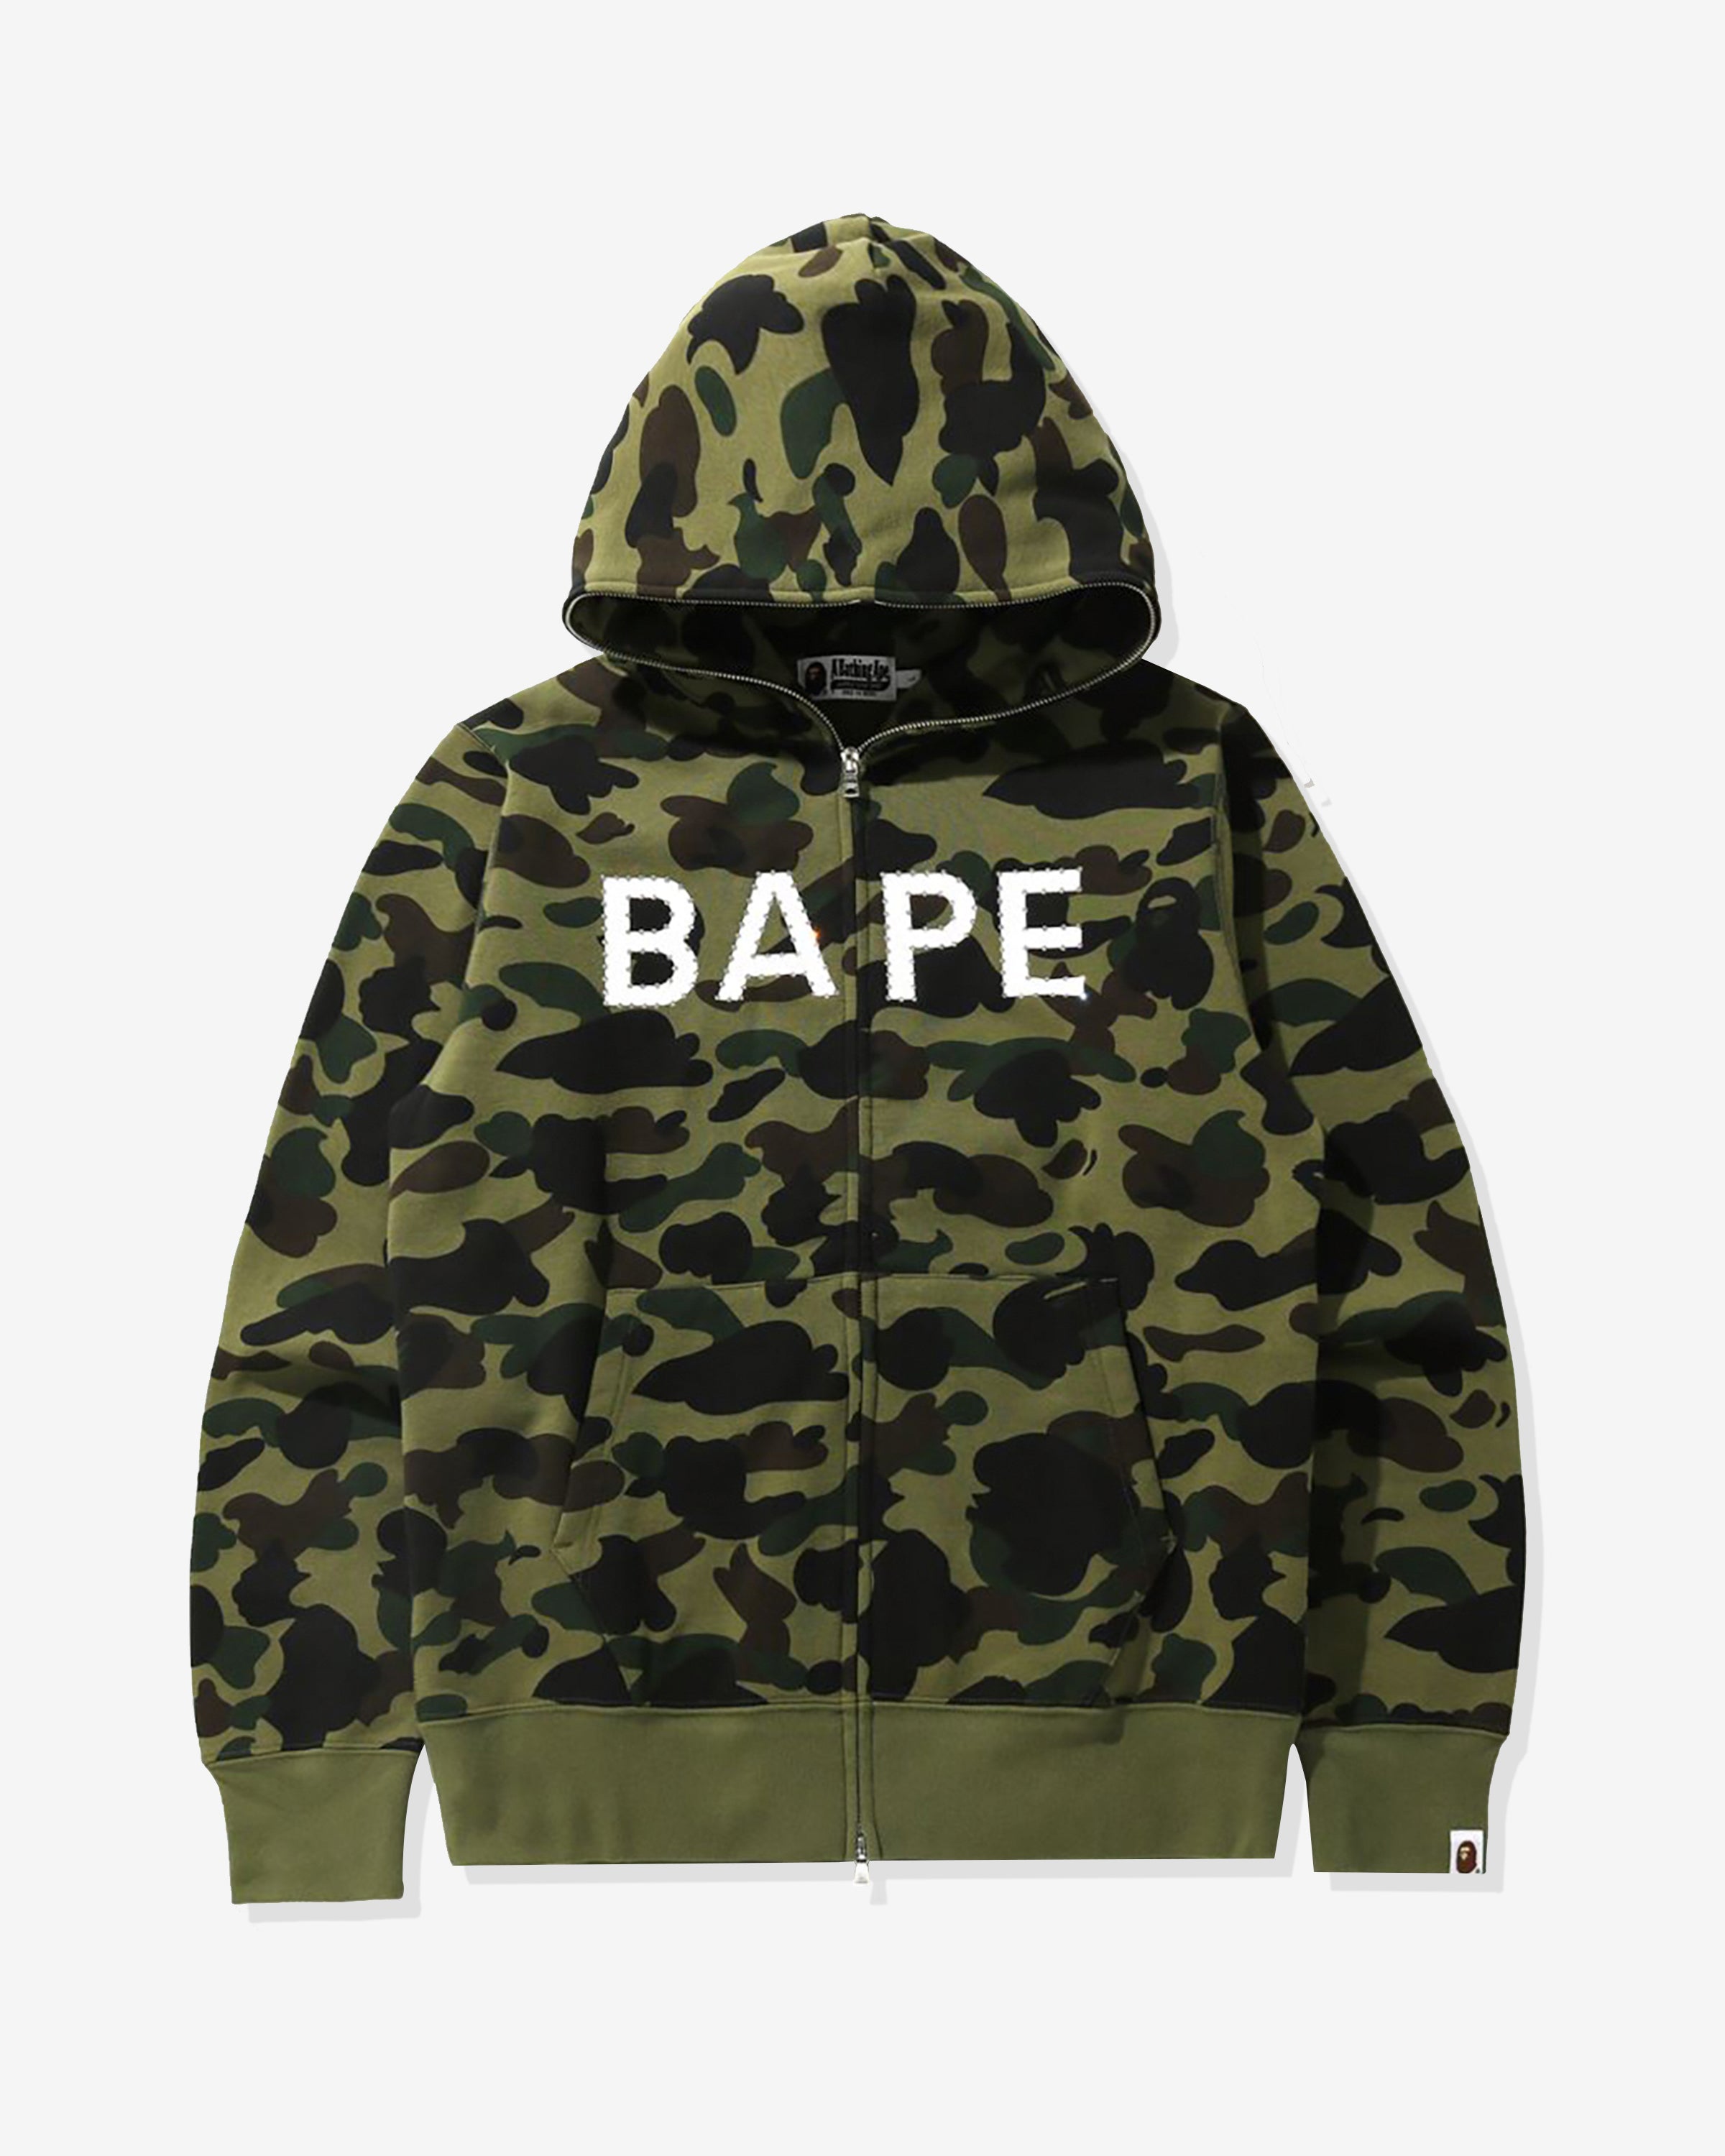 BAPE 1ST CAMO CRYSTAL STONE FULL ZIP HOODIE – Undefeated